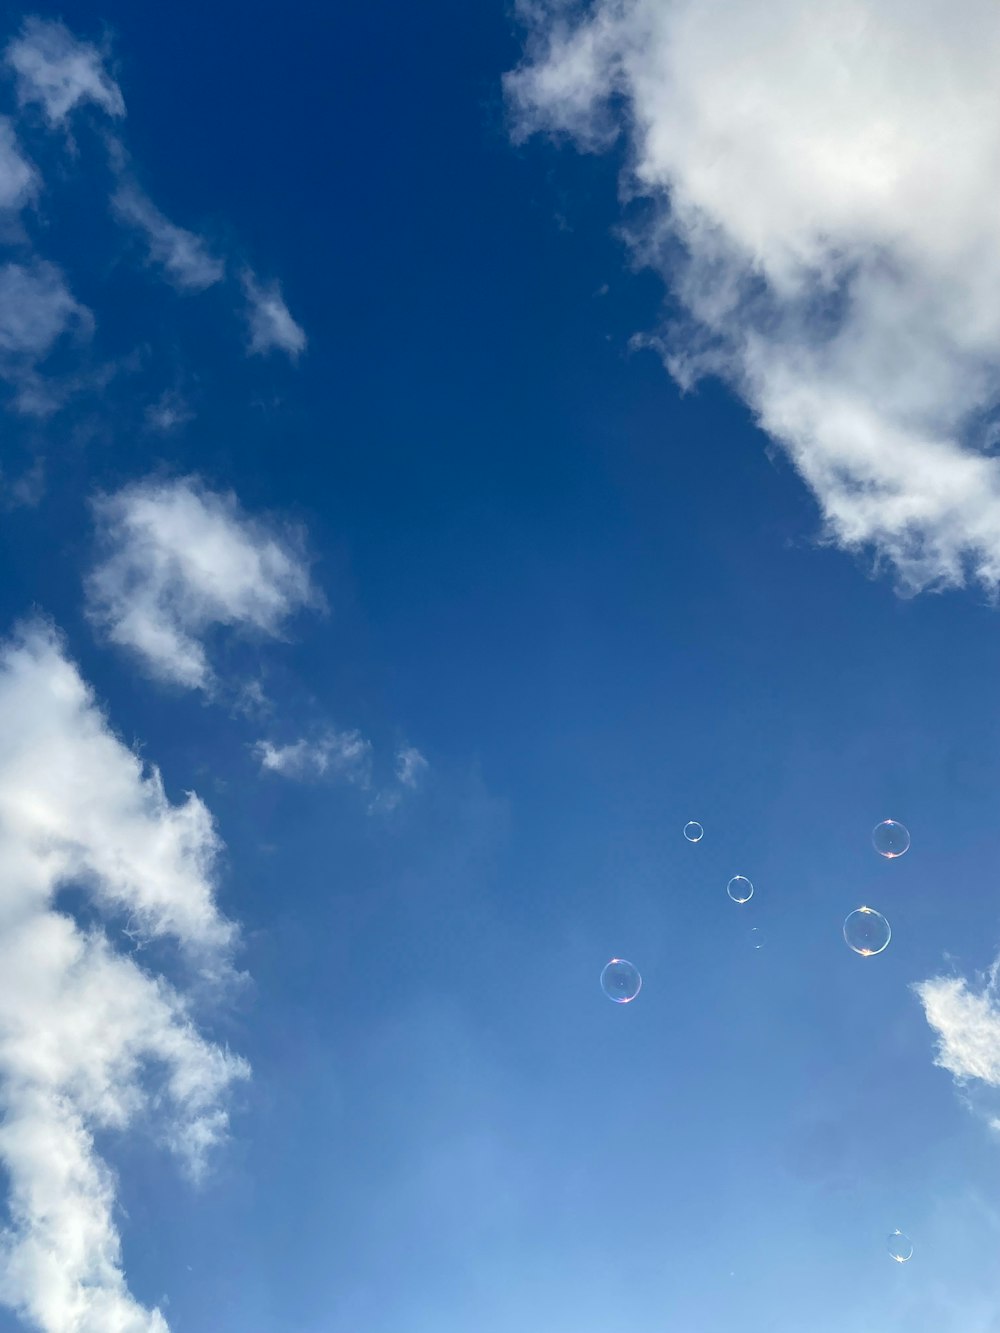 a clear blue sky with bubbles floating in the air